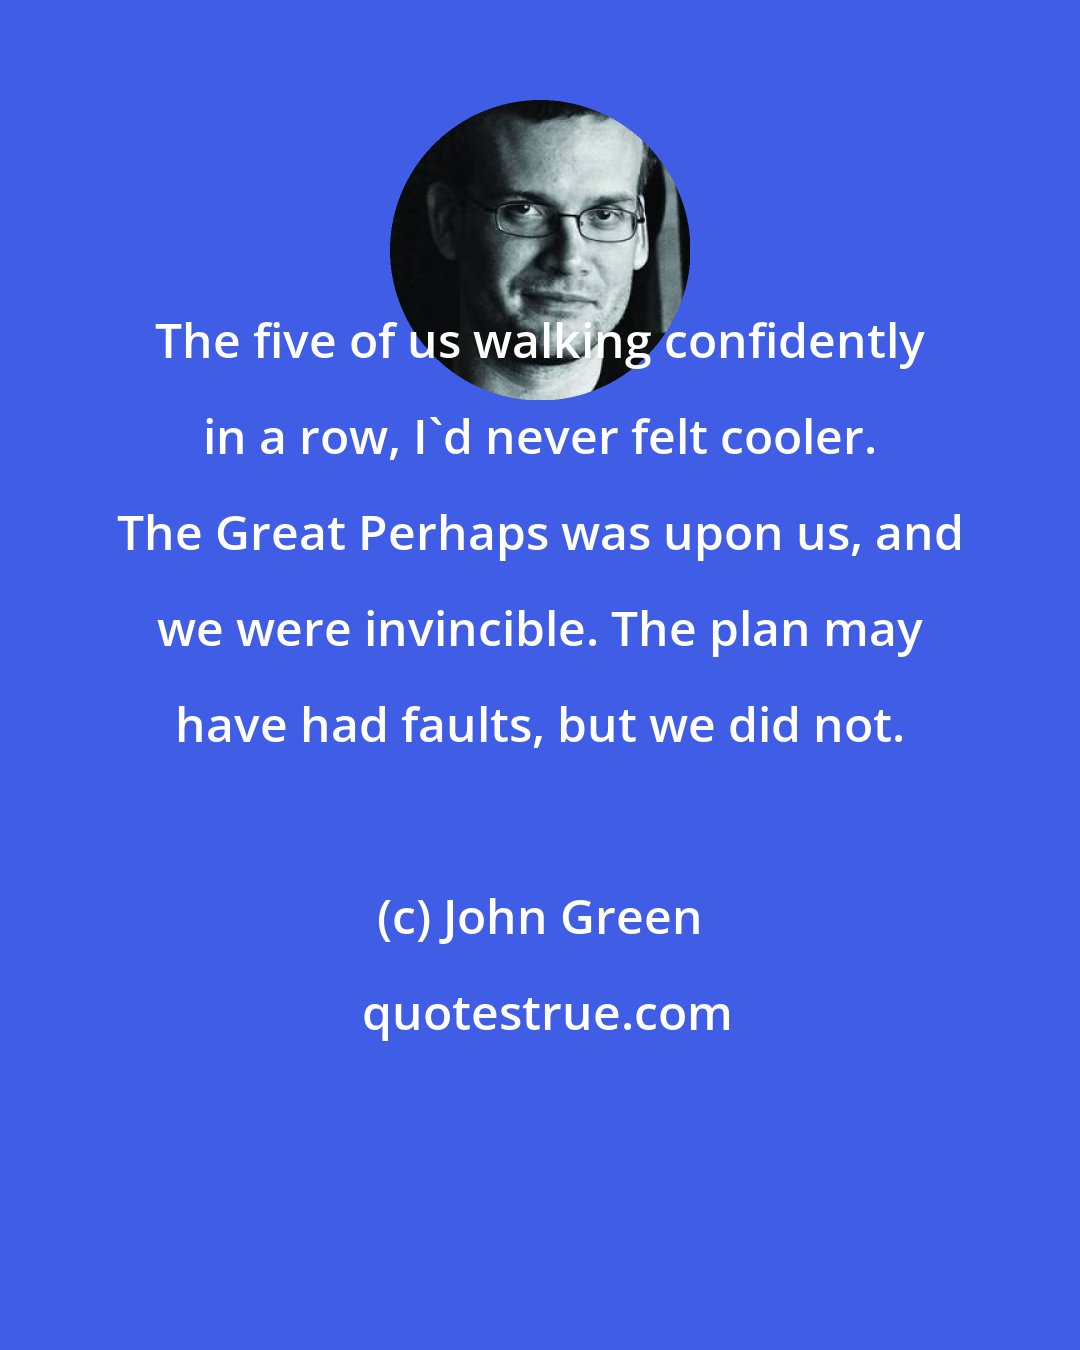 John Green: The five of us walking confidently in a row, I'd never felt cooler. The Great Perhaps was upon us, and we were invincible. The plan may have had faults, but we did not.